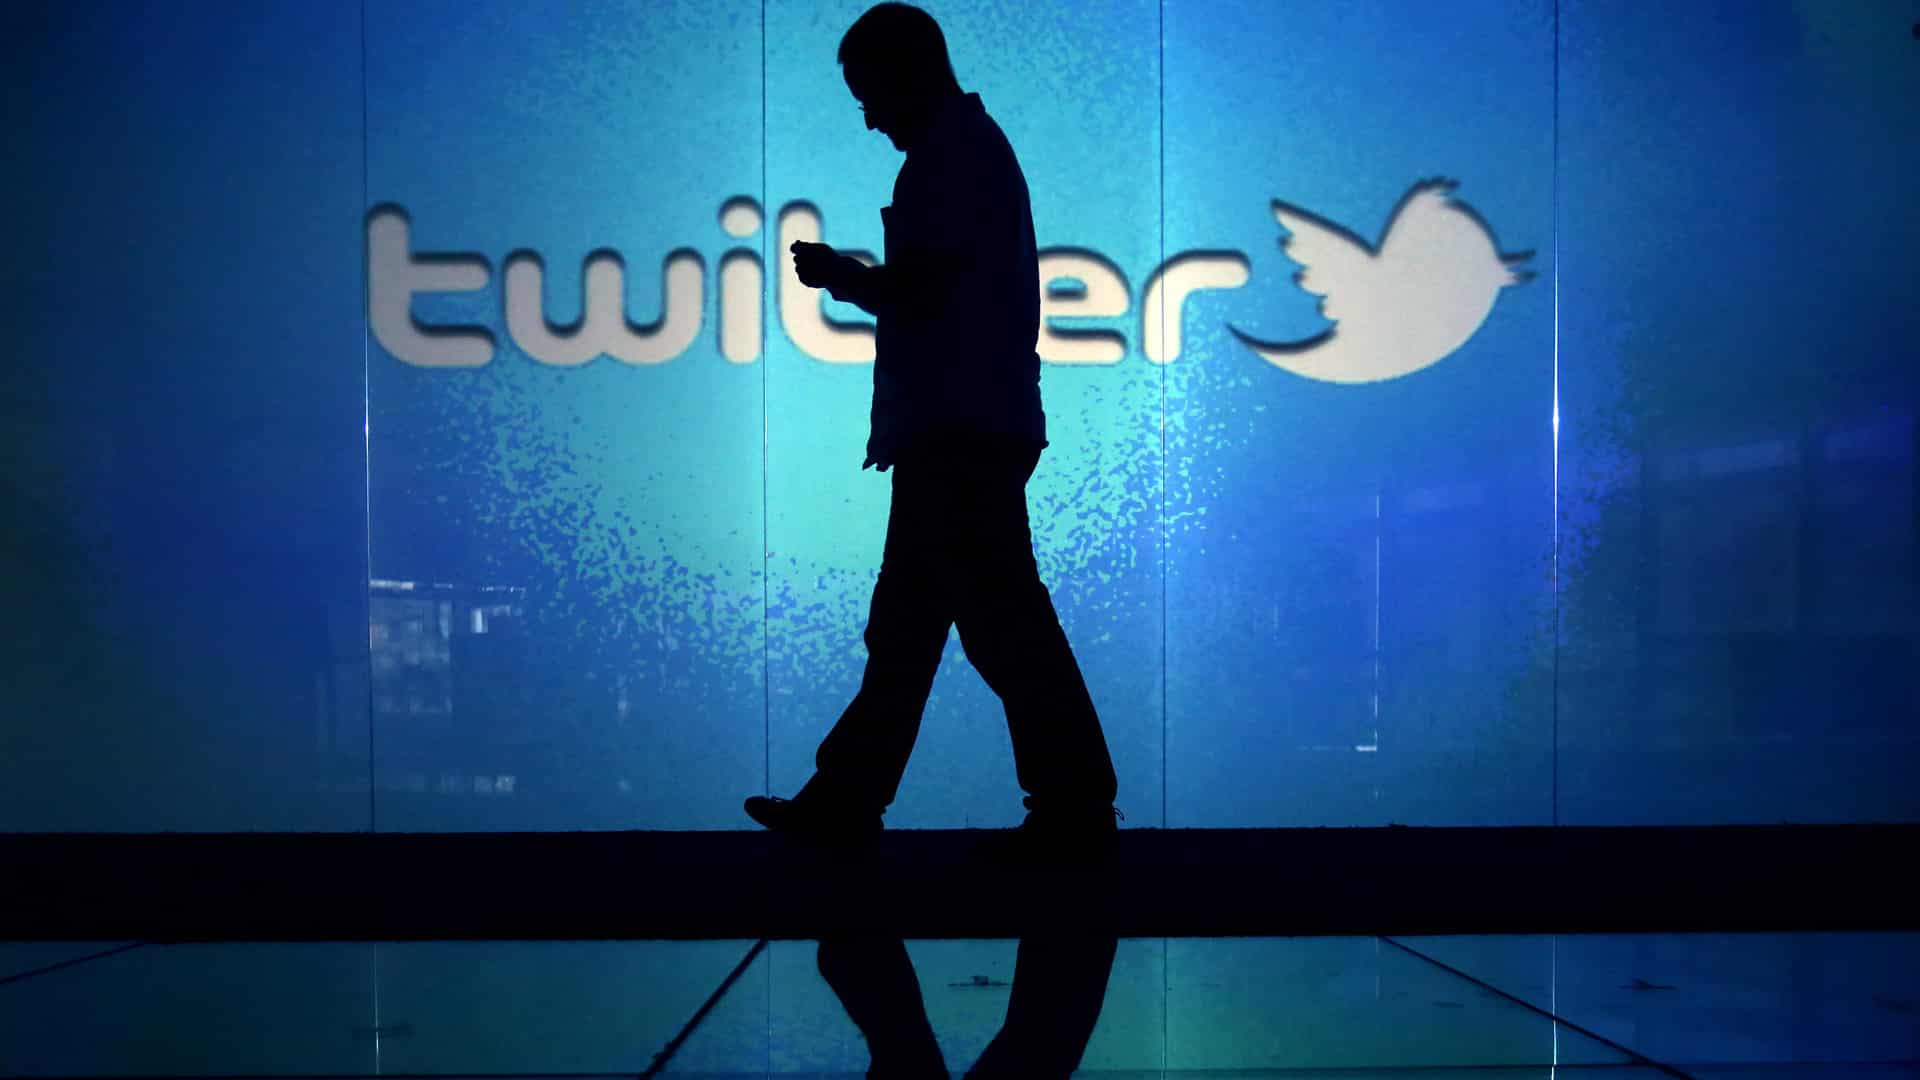 Twitter doc shows govt requests for blocking tweets of some advocacy groups, politicians